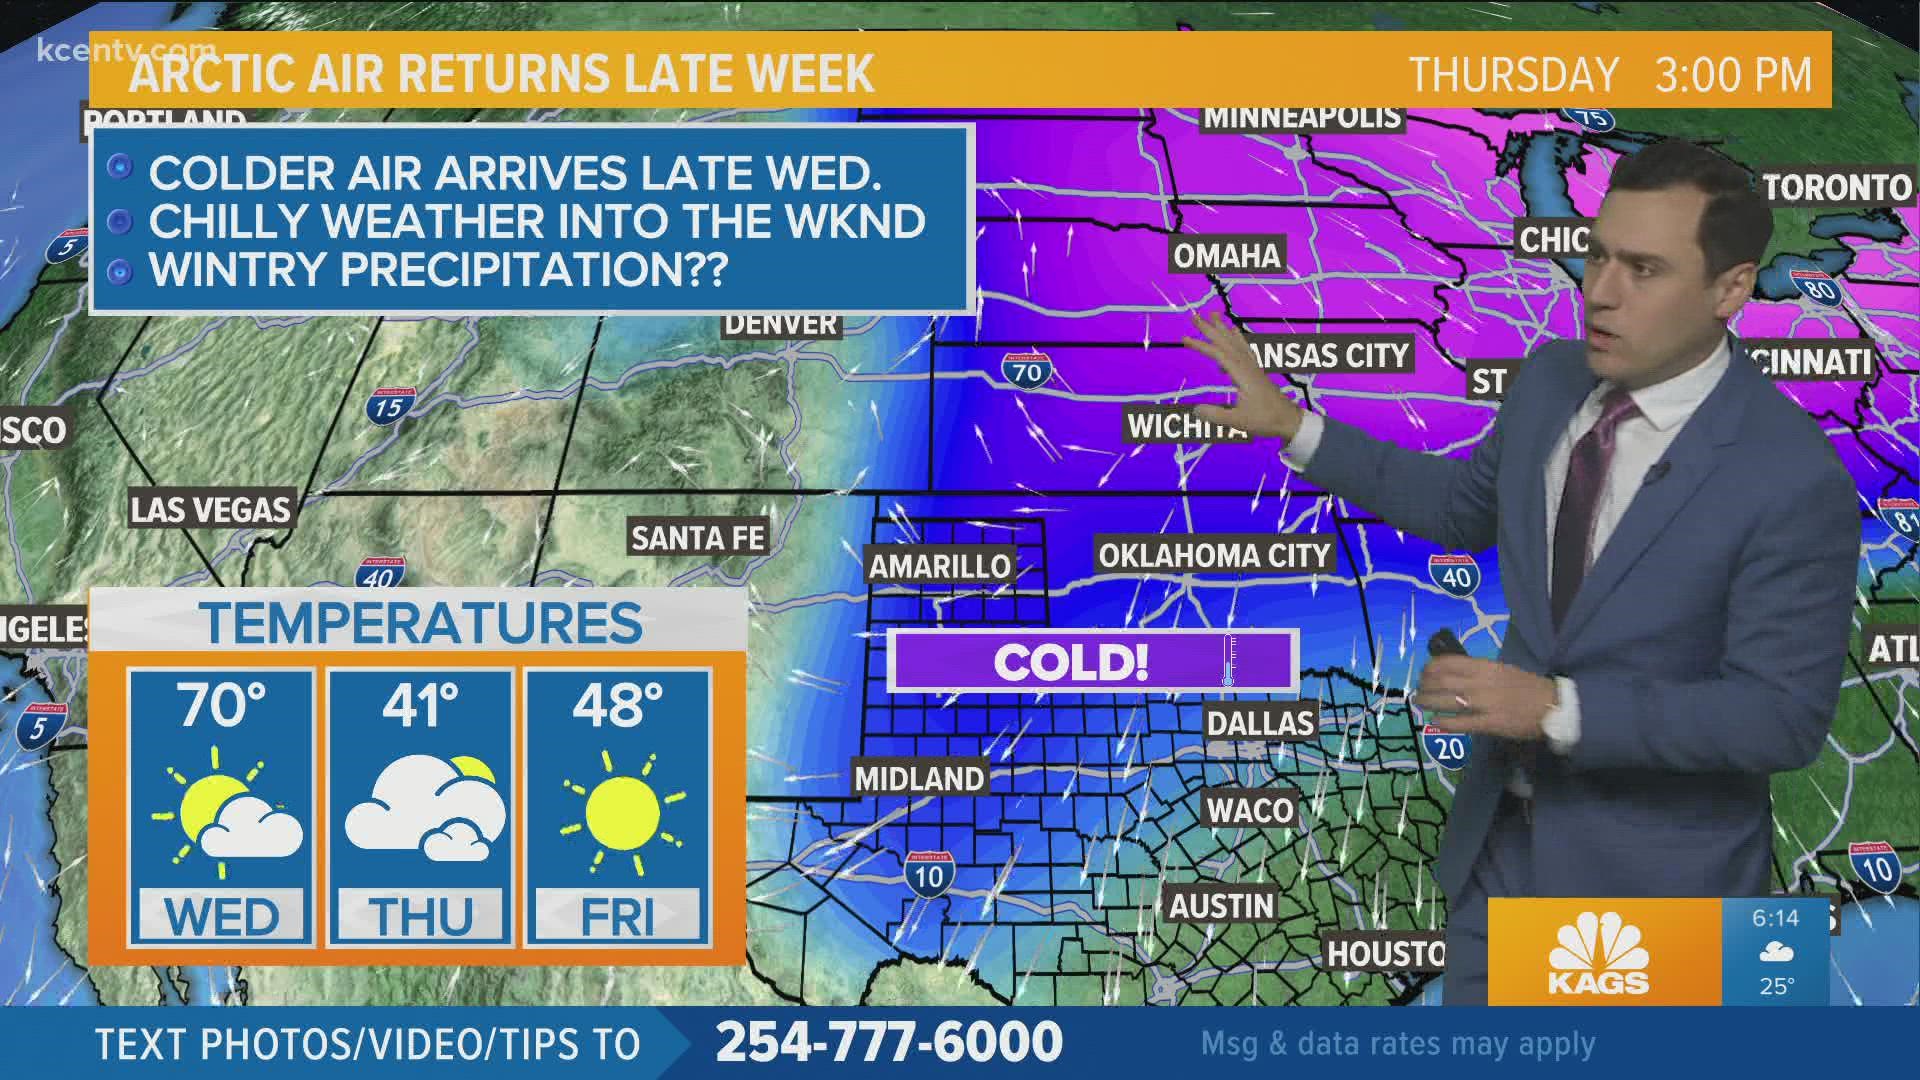 Next arctic cold front arrives Wednesday.